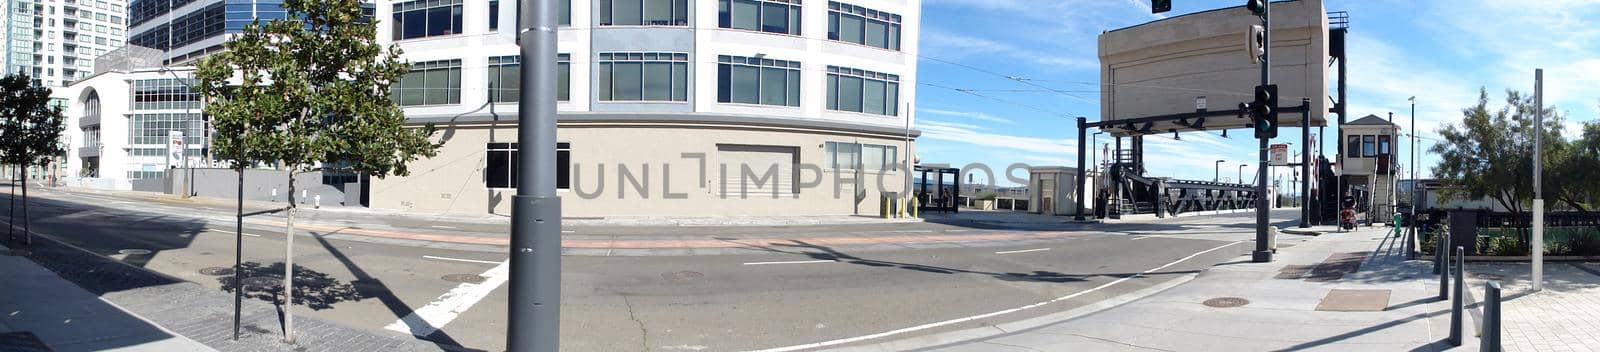 Panorama of 4th Street and Bridge in Mission Bay, San Francisco. The 4th street bridge is a Warren truss Bascule bridge over China Basin on Fourth Street in San Francisco.   Built 1916, it is also carries the name of the Peter R. Maloney Bridge.